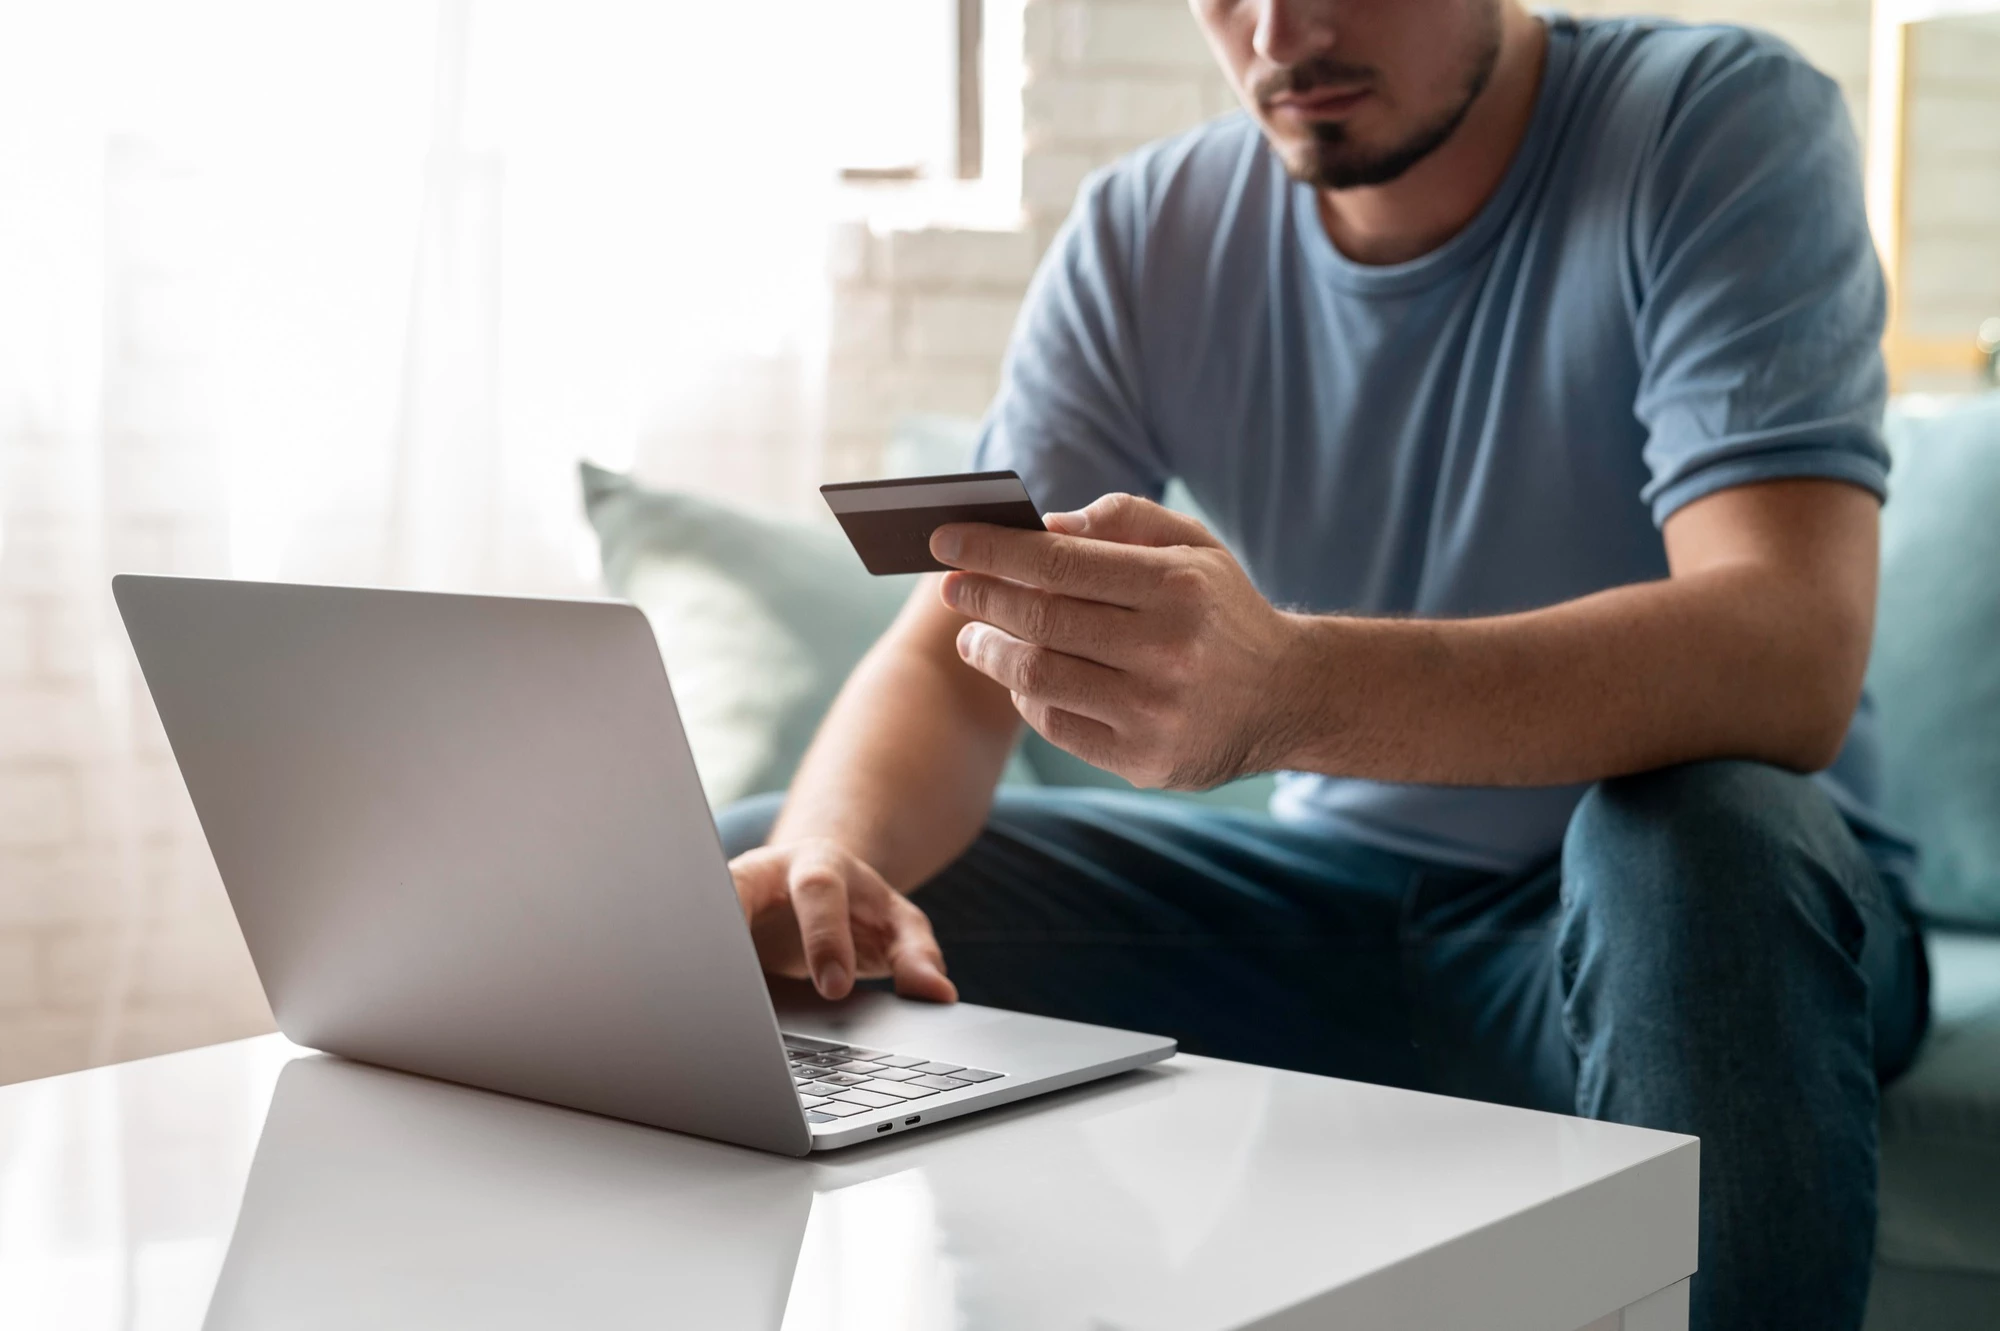 man entering card details while online shopping on laptop